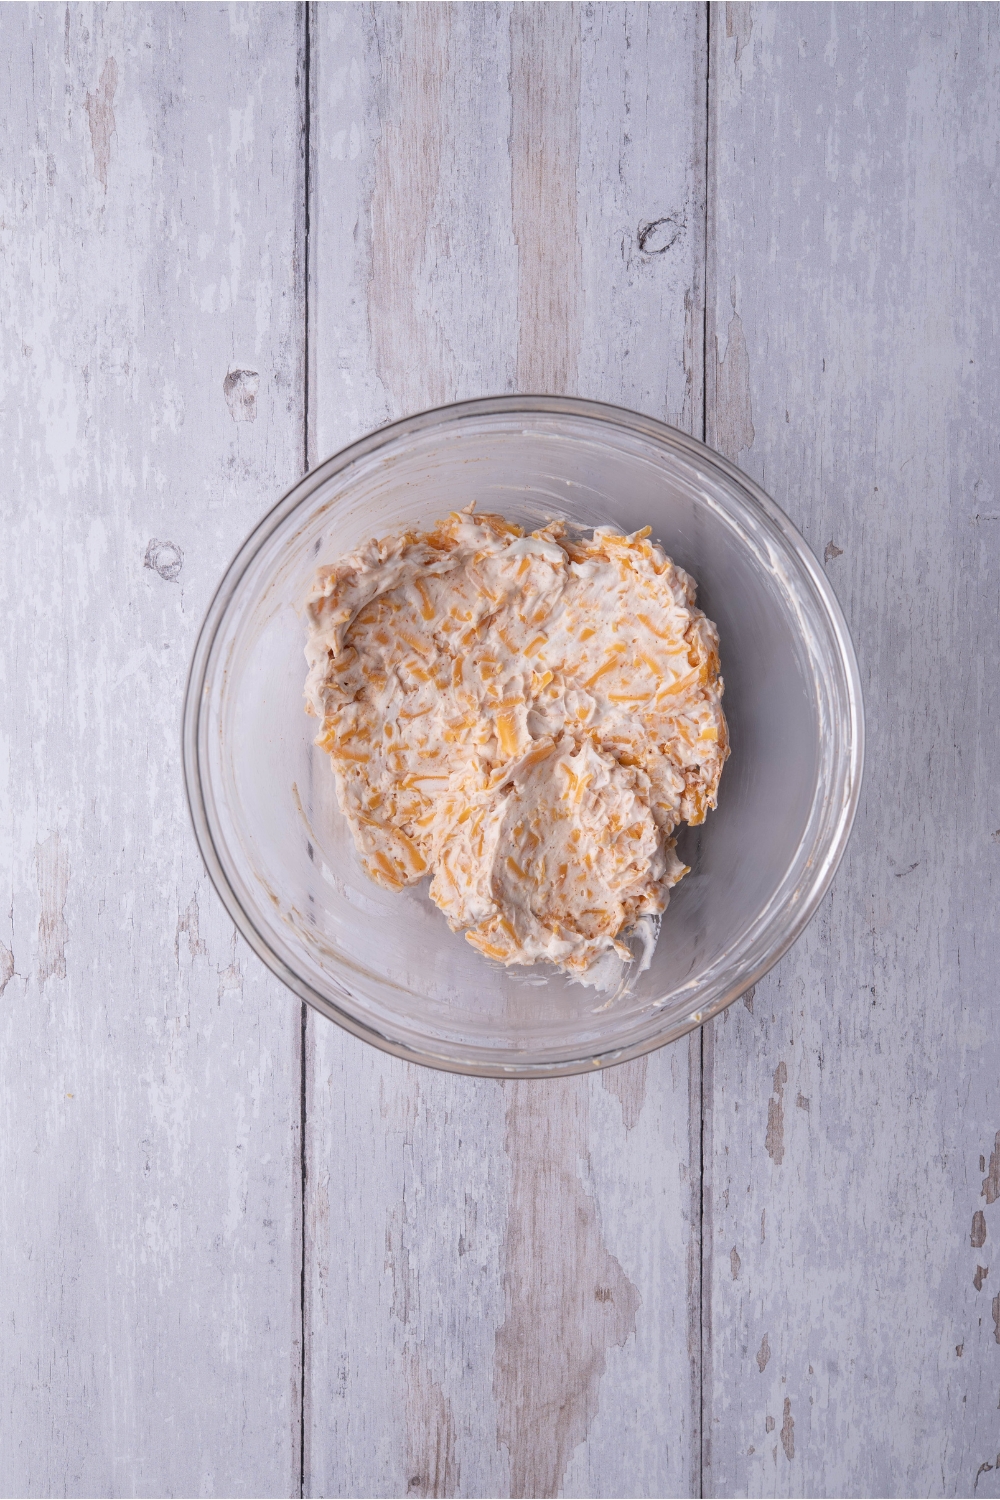 A clear bowl filled with a cream cheese and shredded cheese mixture.